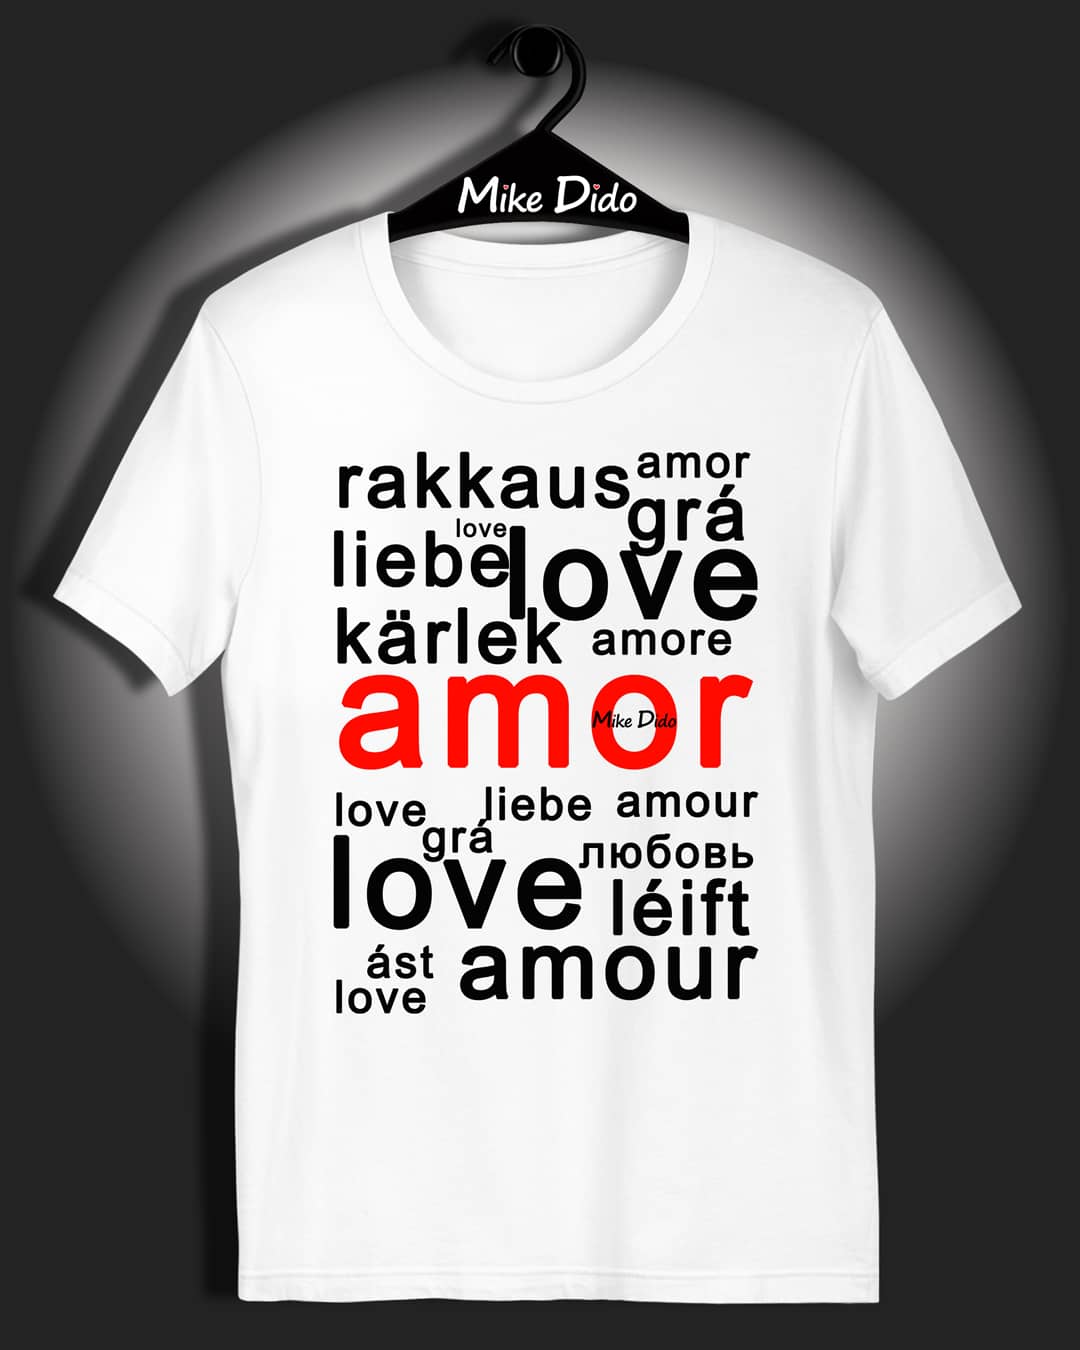 All Day Shirt Amor And Love In Different Languages by Mike Dido